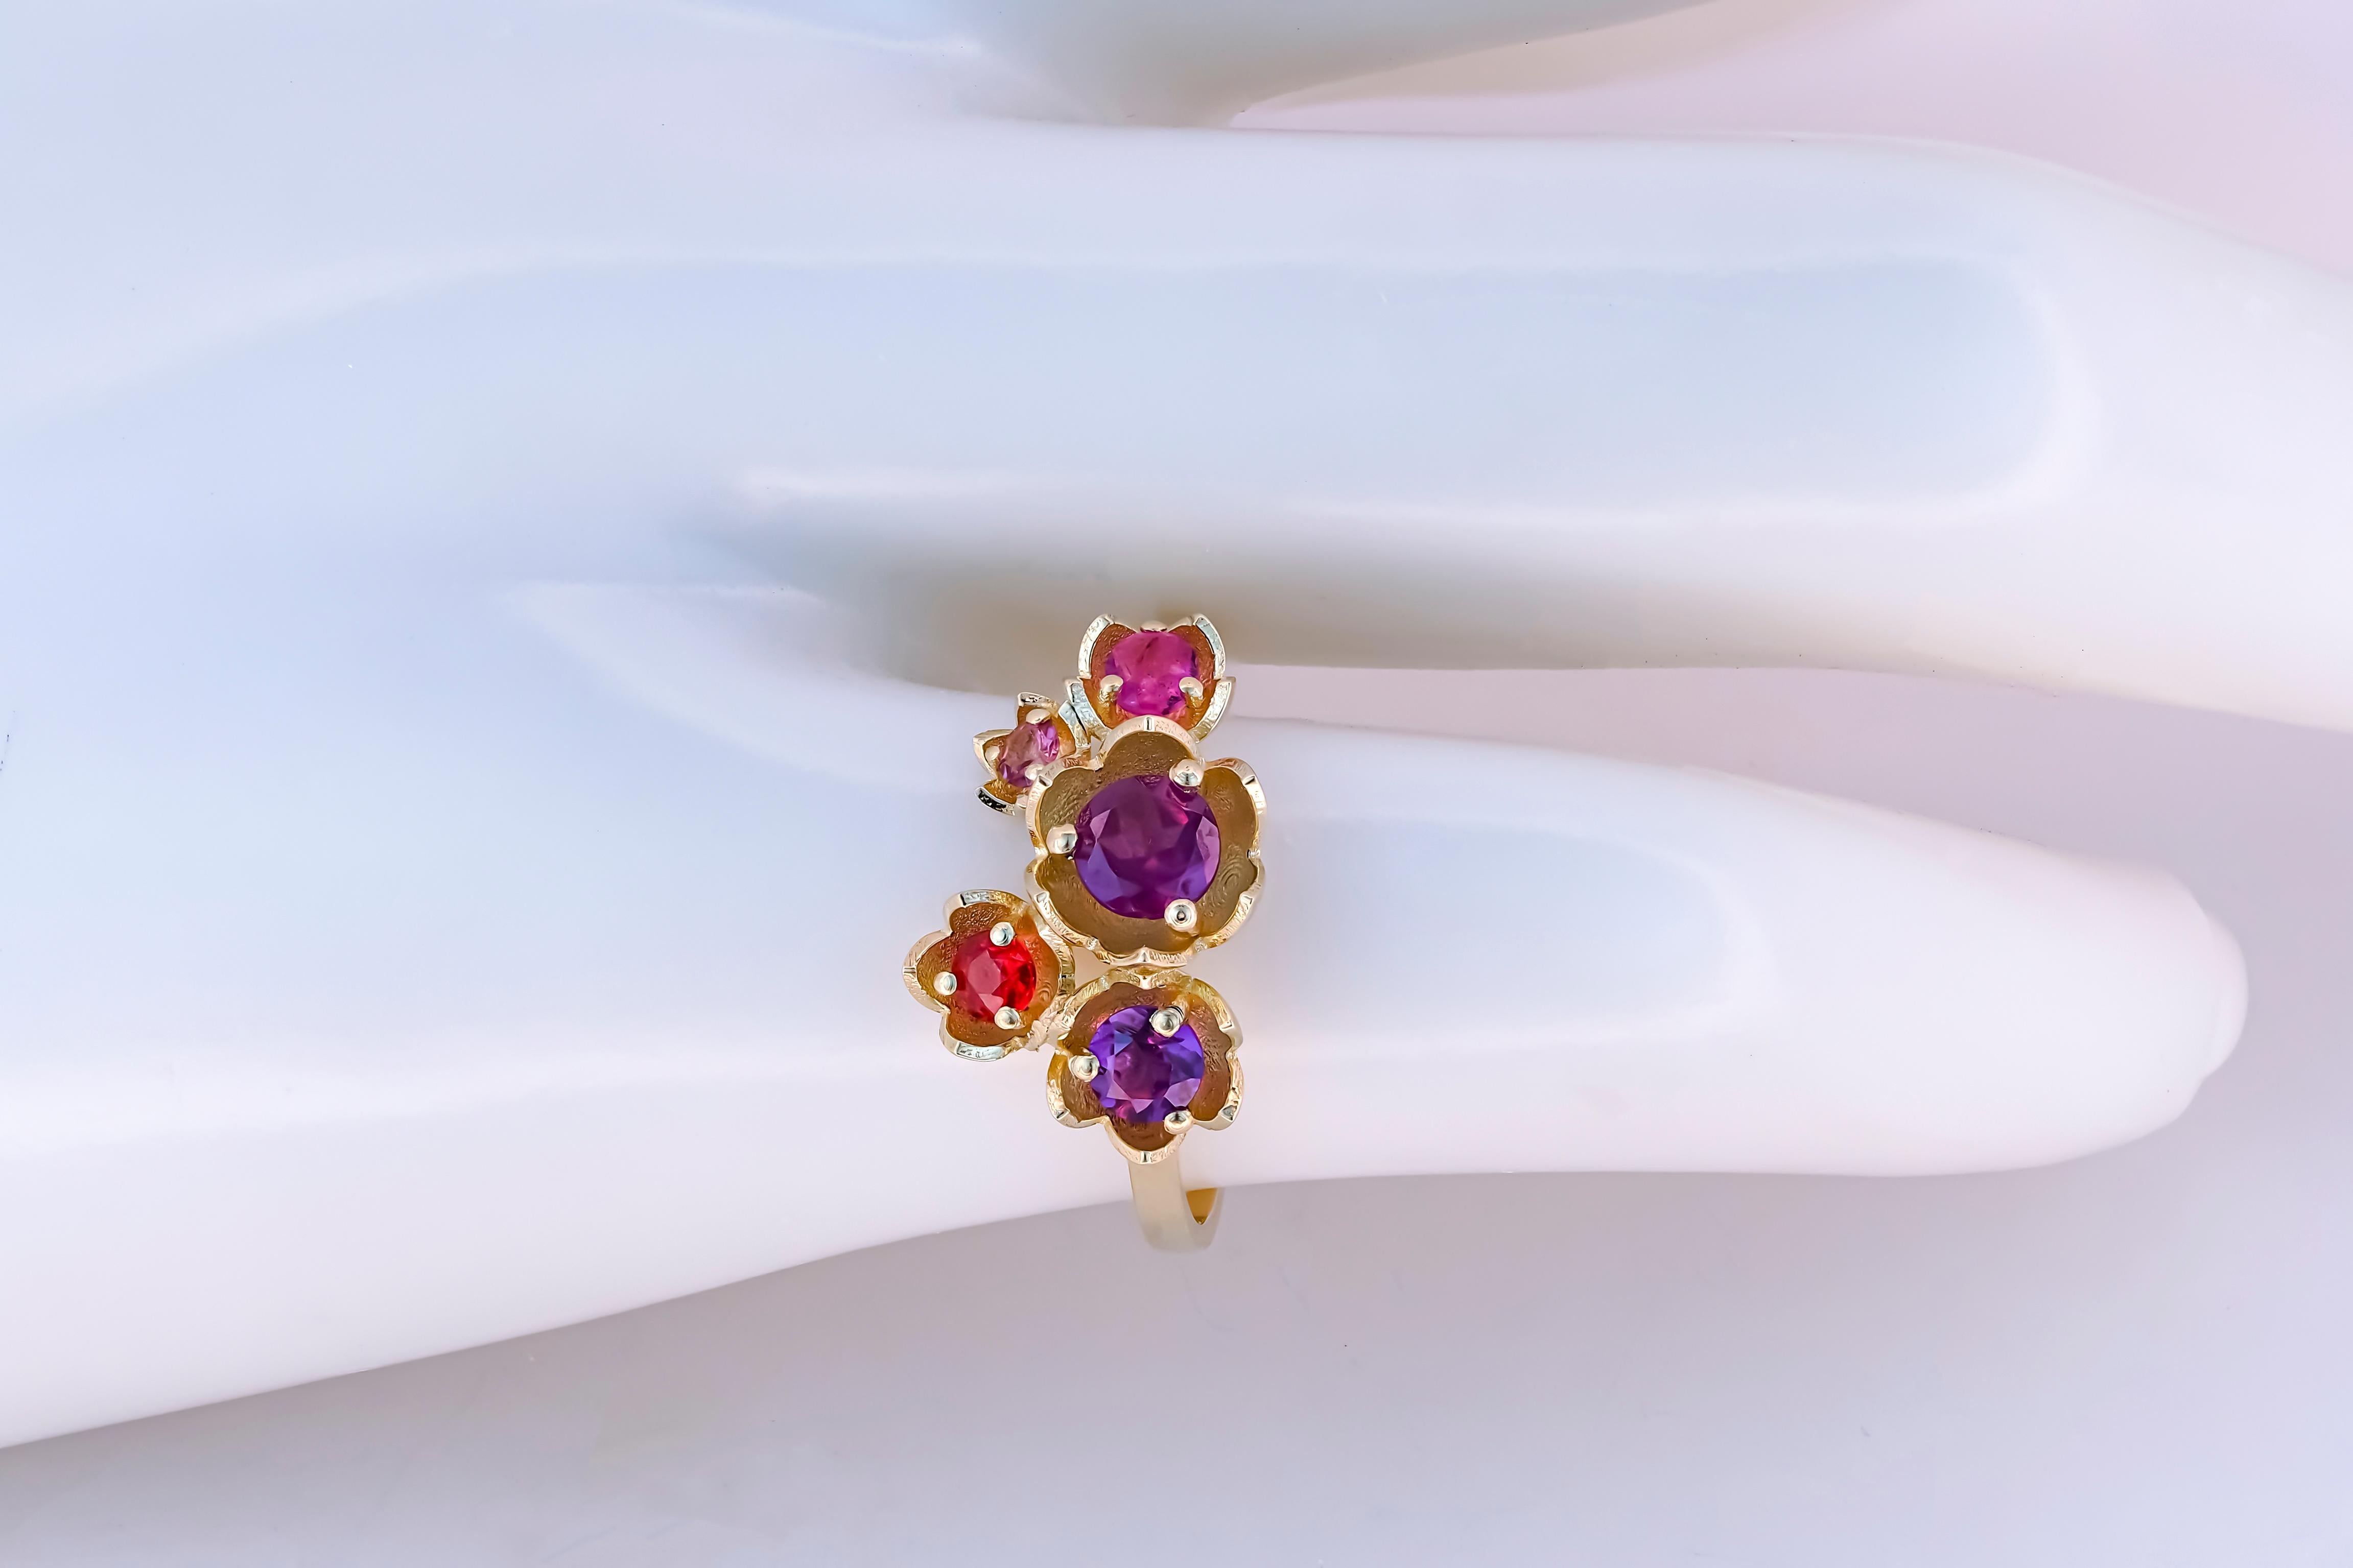 14 Karat Gold Blossom Ring with Multicolored Gemstones, Pink Tourmaline Ring 1